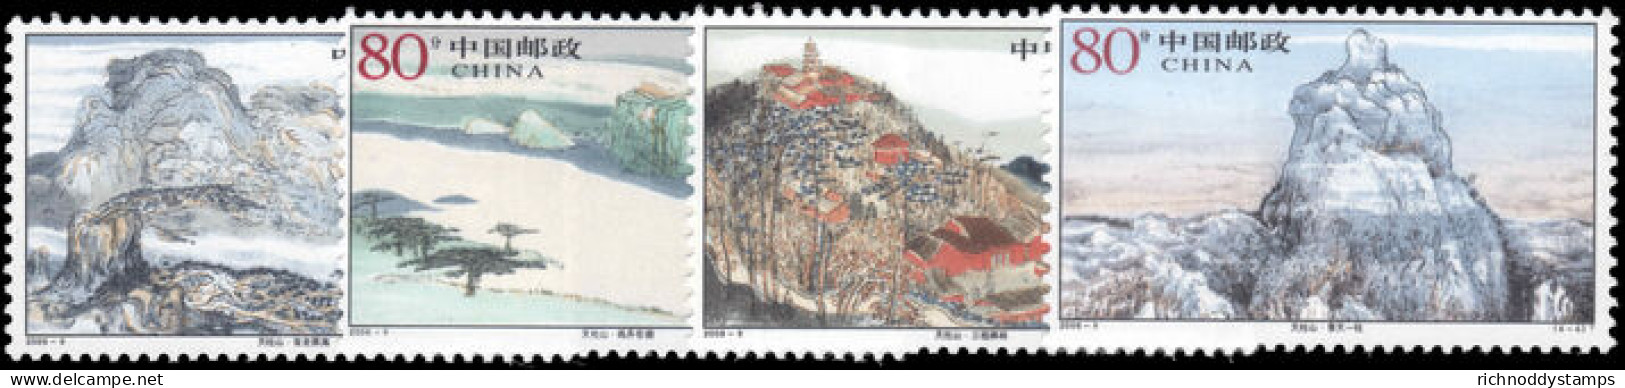 Peoples Republic Of China 2006 Tianzhu Mountain Unmounted Mint. - Unused Stamps